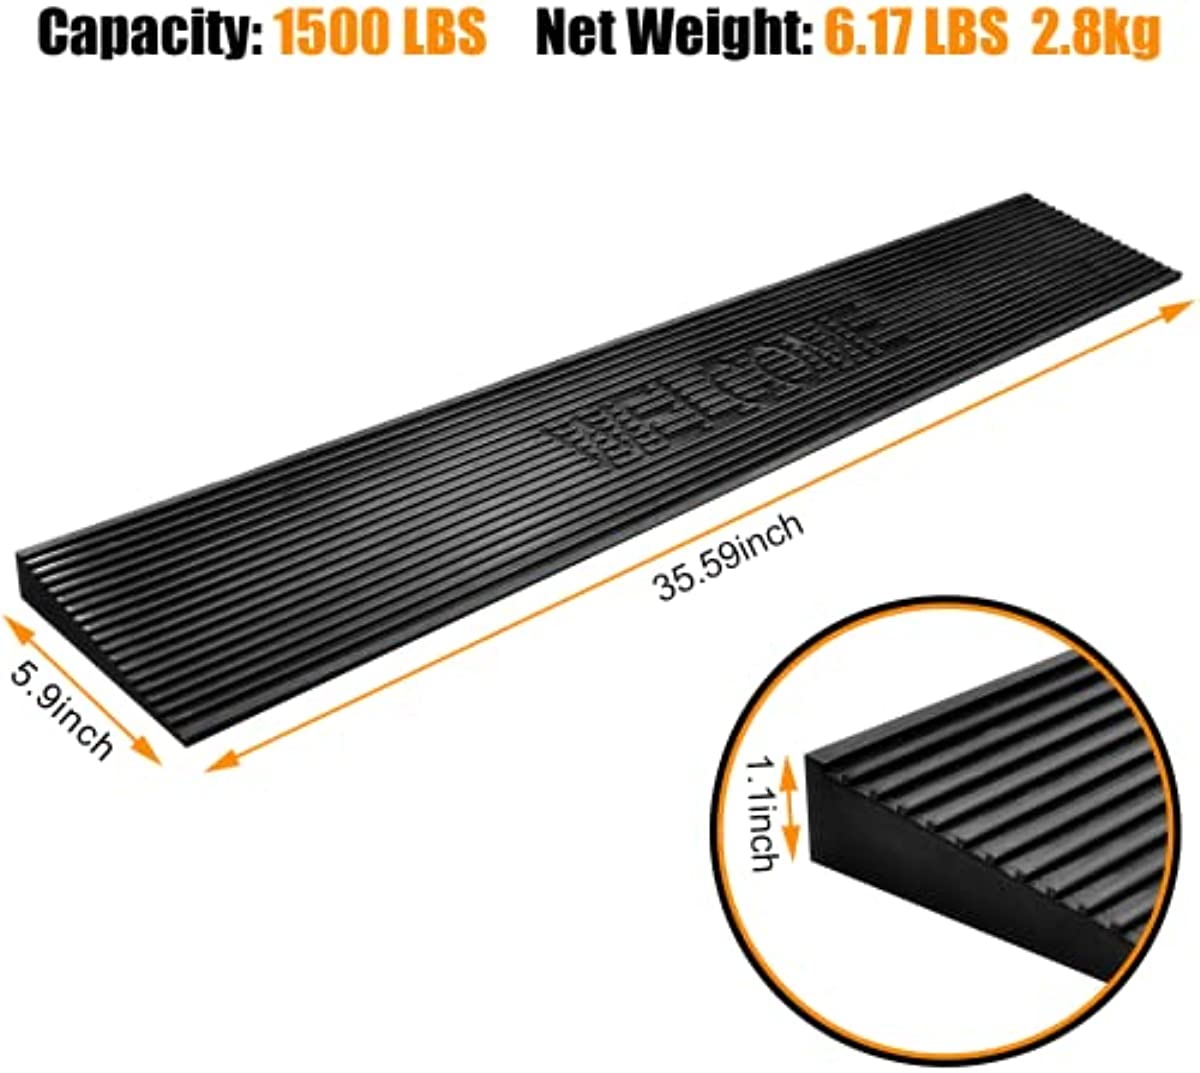 1.1\" Rise Rubber Threshold Ramp, Non-Slip Solid Threshold Wheelchair Ramp, for Doorways, Stairs, Steps, Curbside Wheelchairs and Mobility Scooters，35.59\" Wide 1500 LBS Capacity